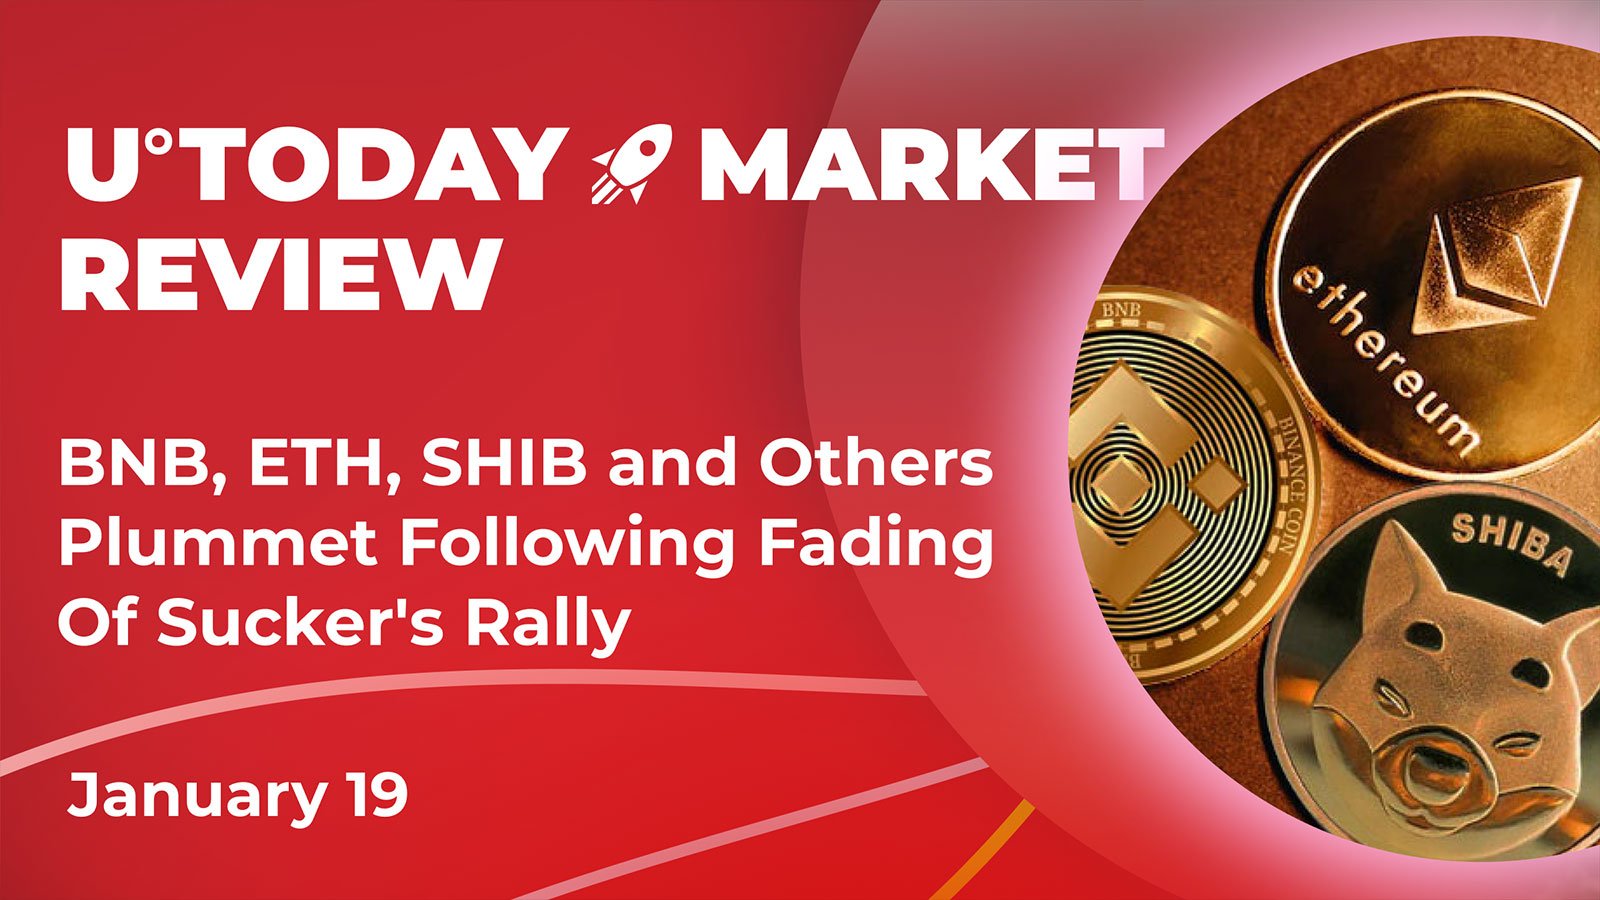 BNB, ETH, SHIB and Others Plummet Following Fading of Sucker's Rally: Crypto Market Review, Jan. 19